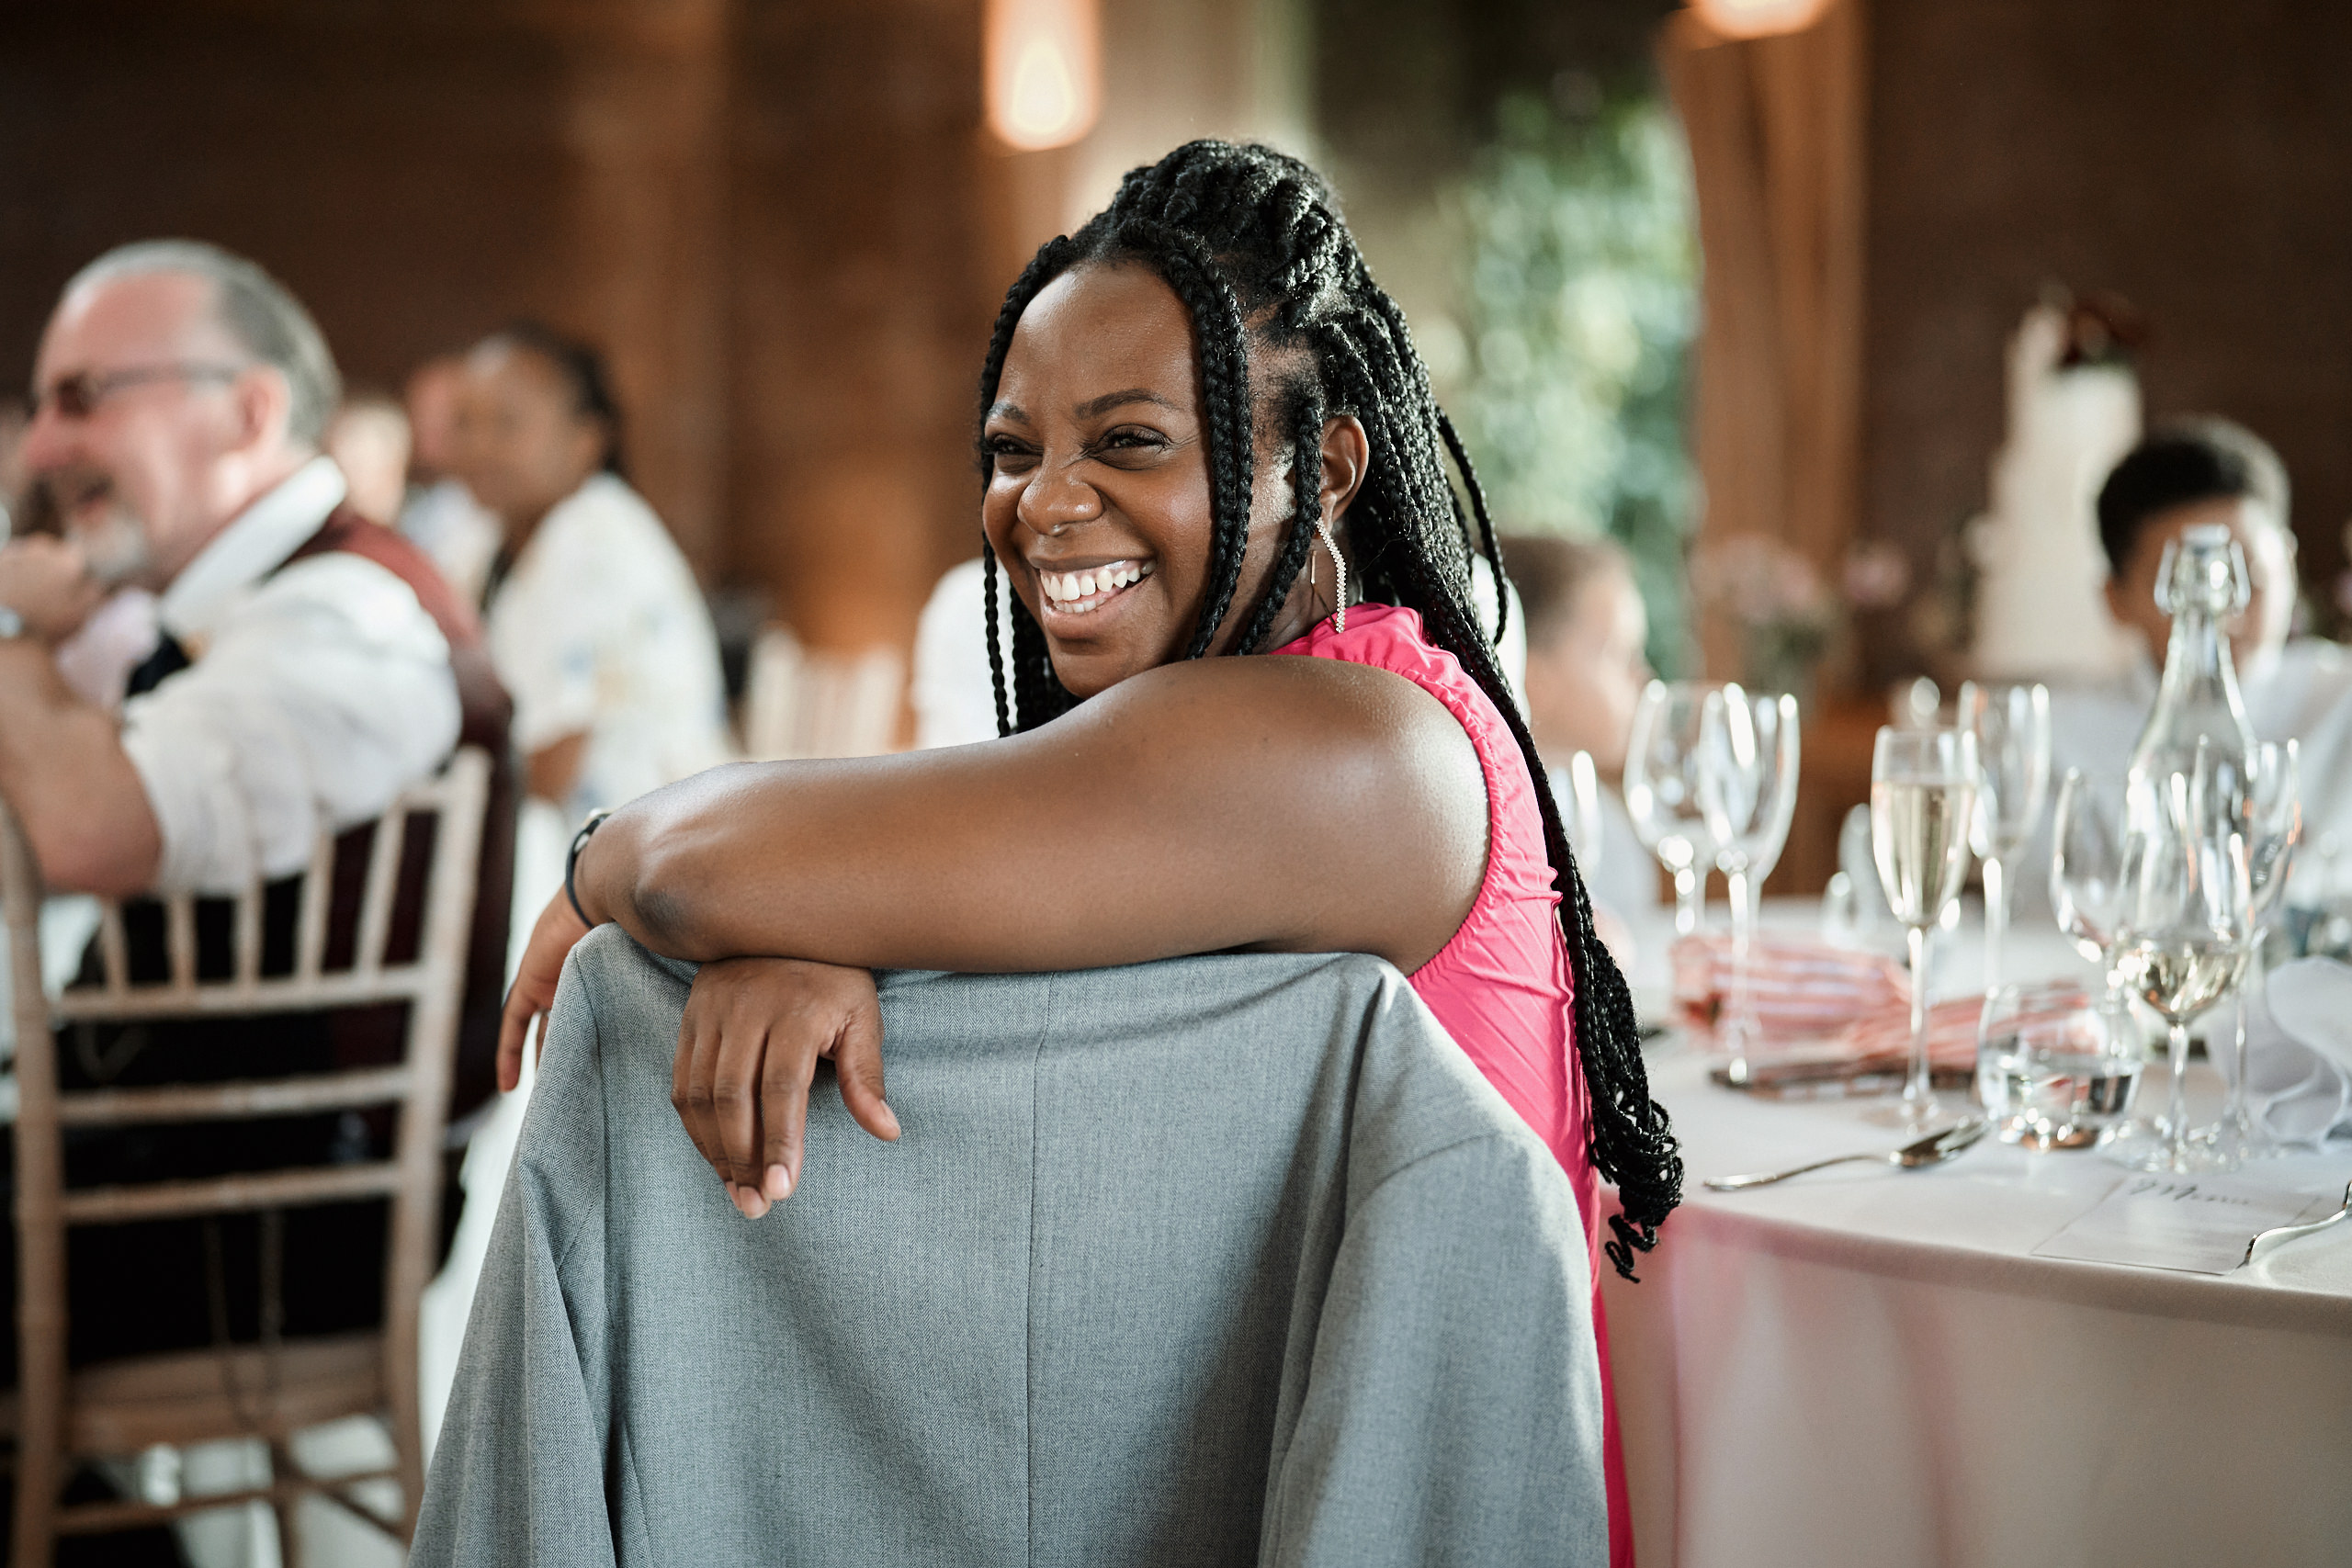 A woman is grinning as she sits at a table during a wedding.